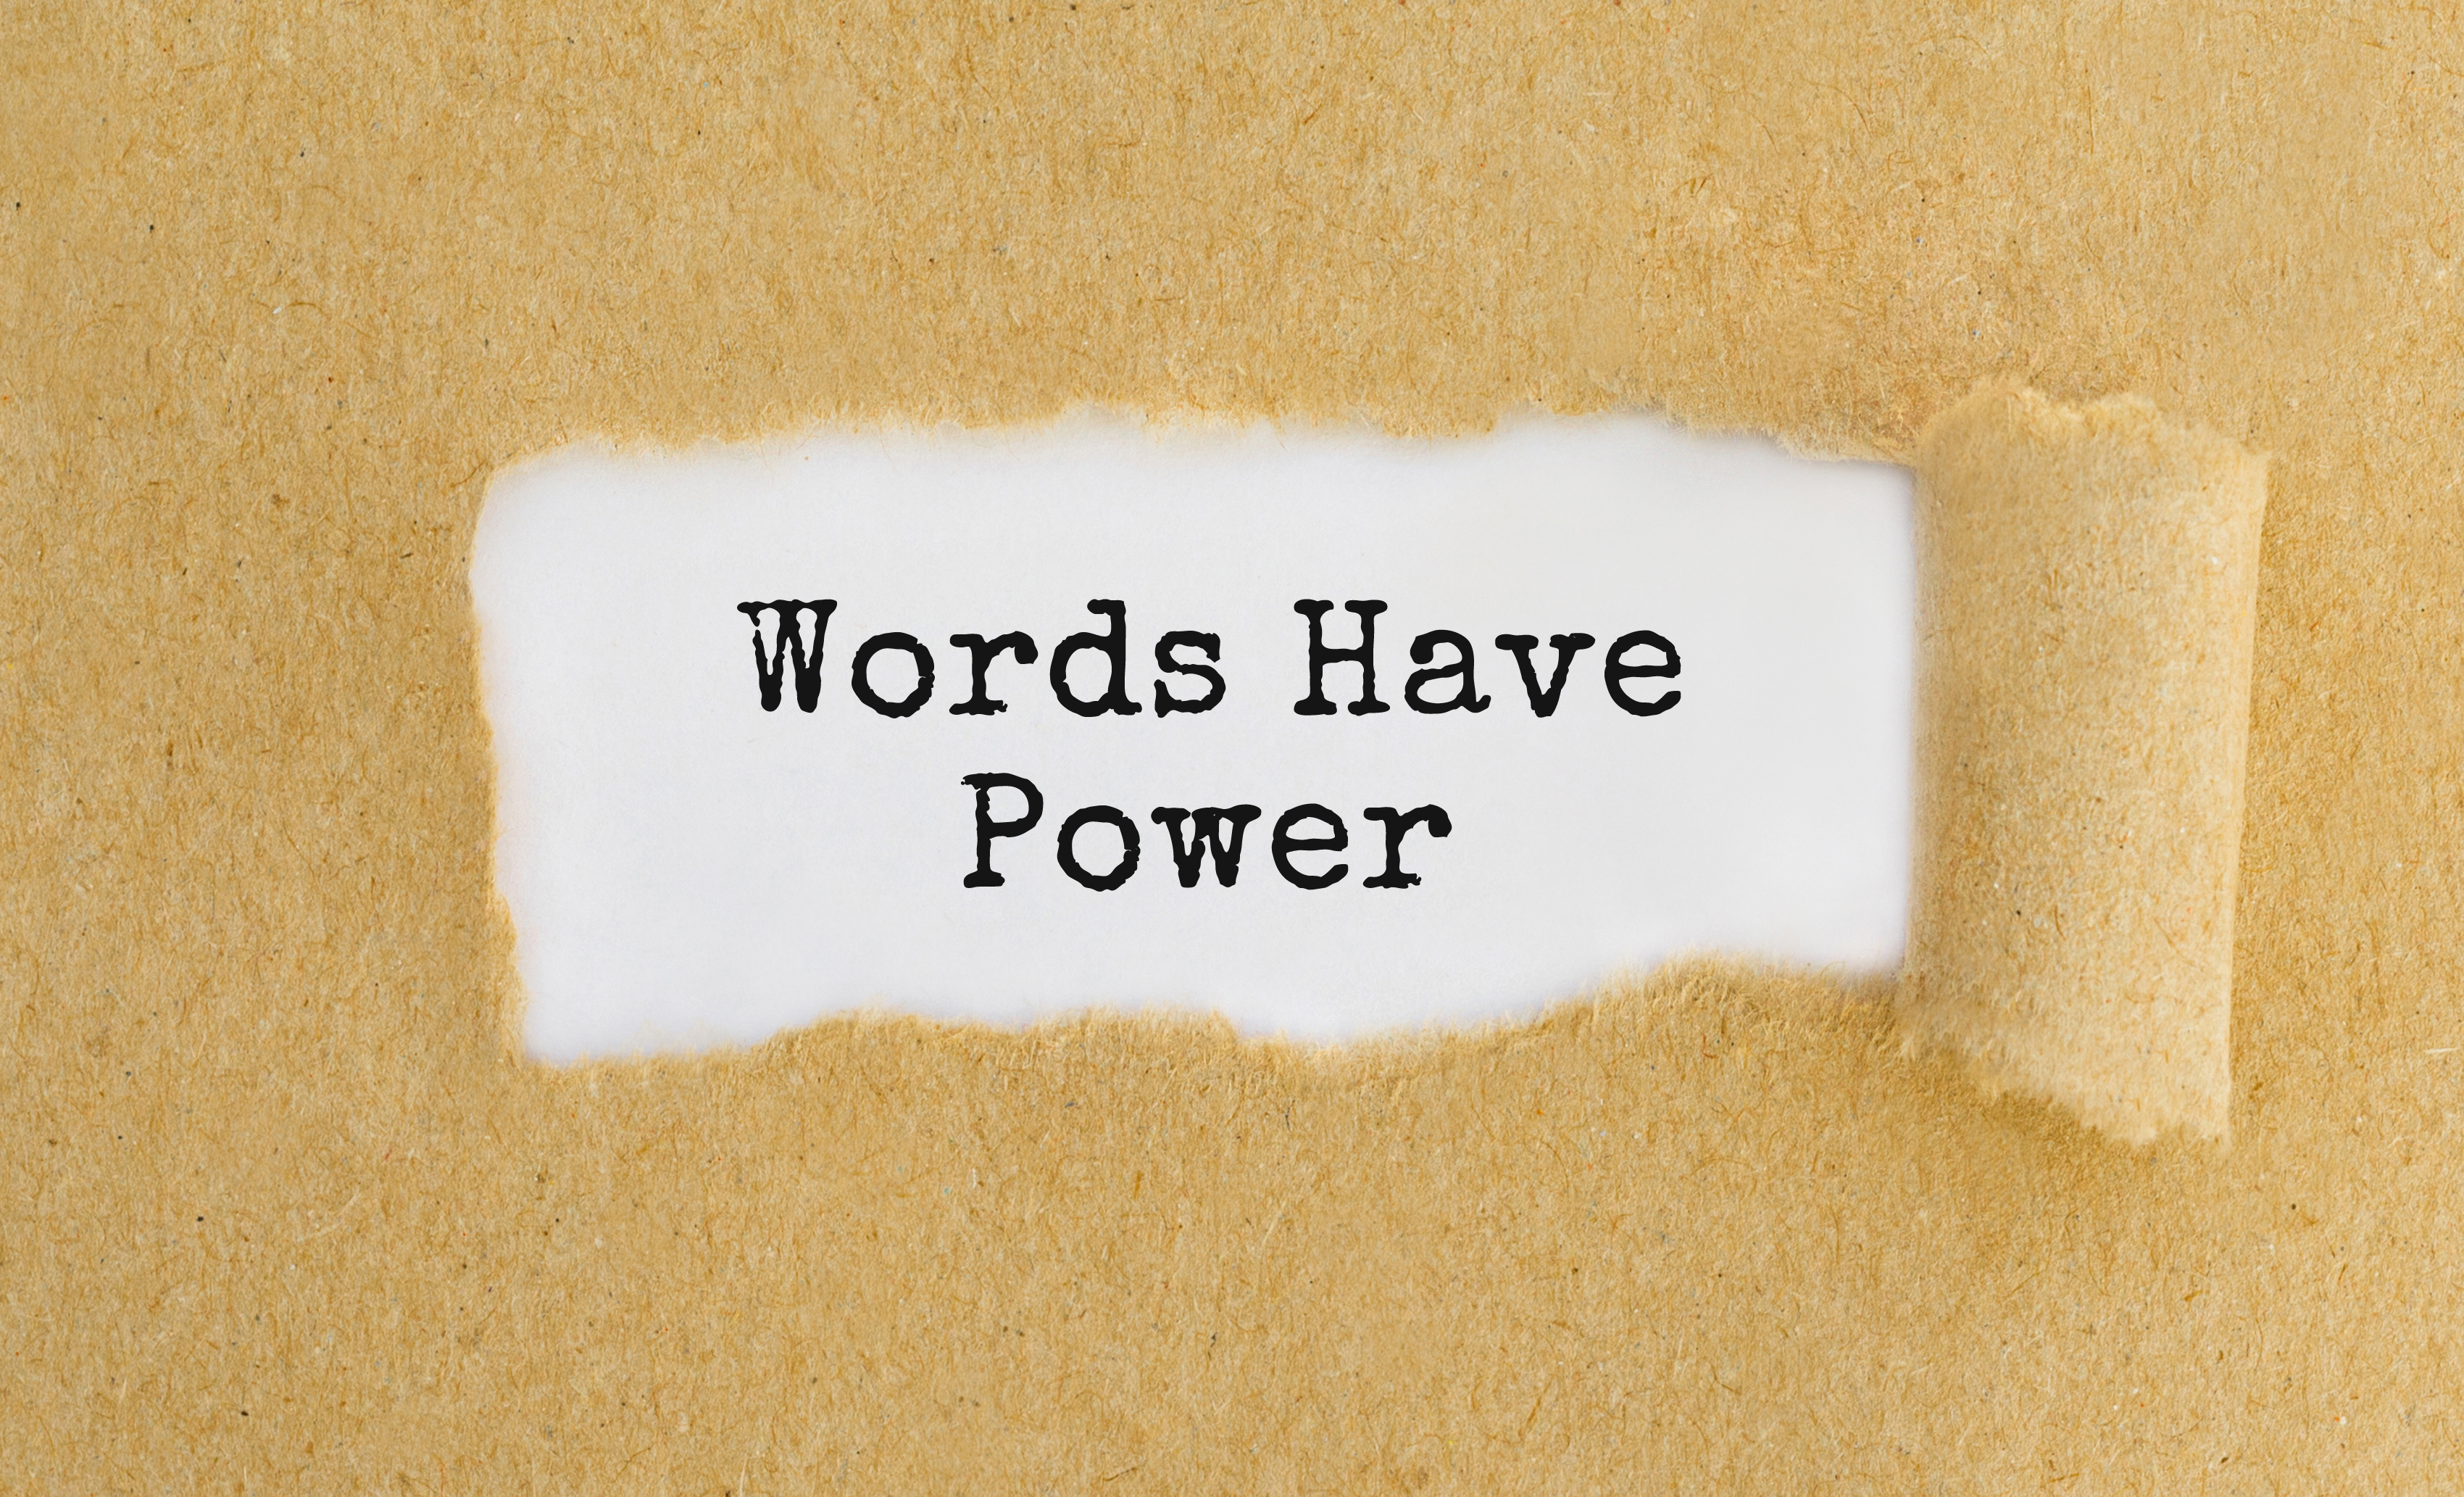 Words matter when talking about mental health